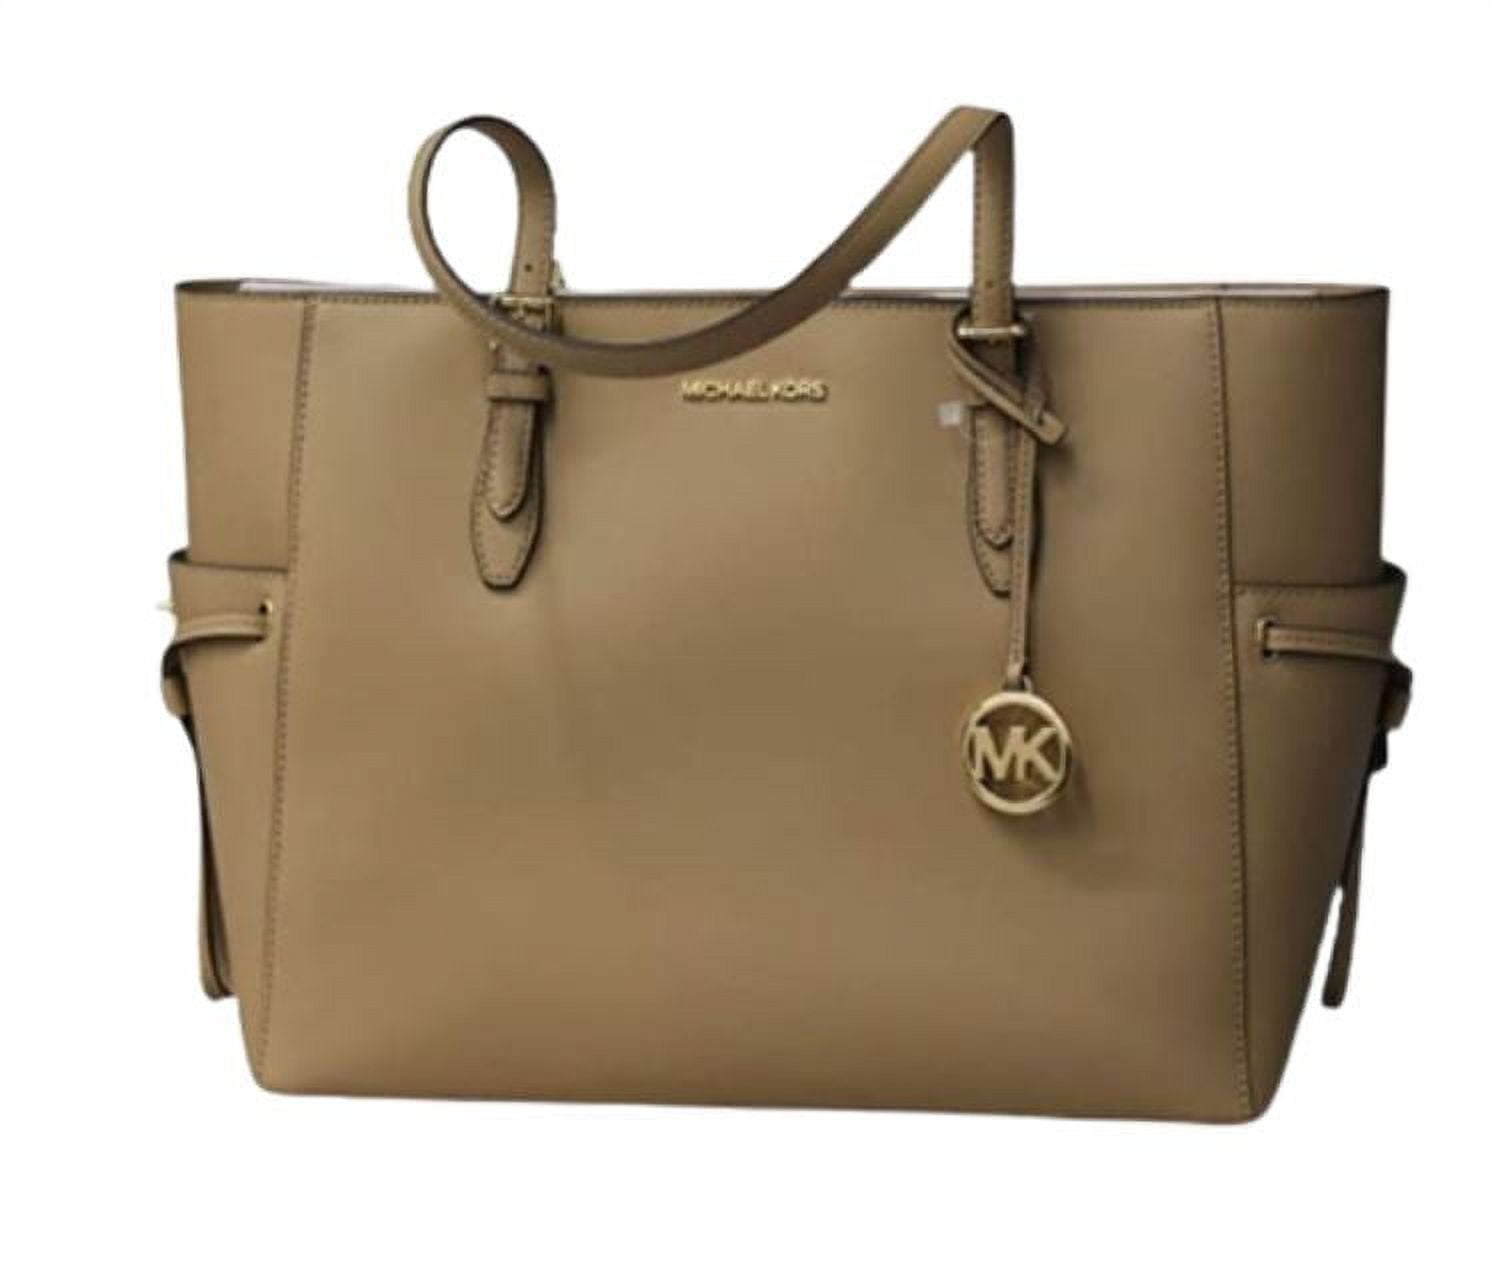 This Michael Kors Tote Bag Can Fit 'Everything Your Heart Desires